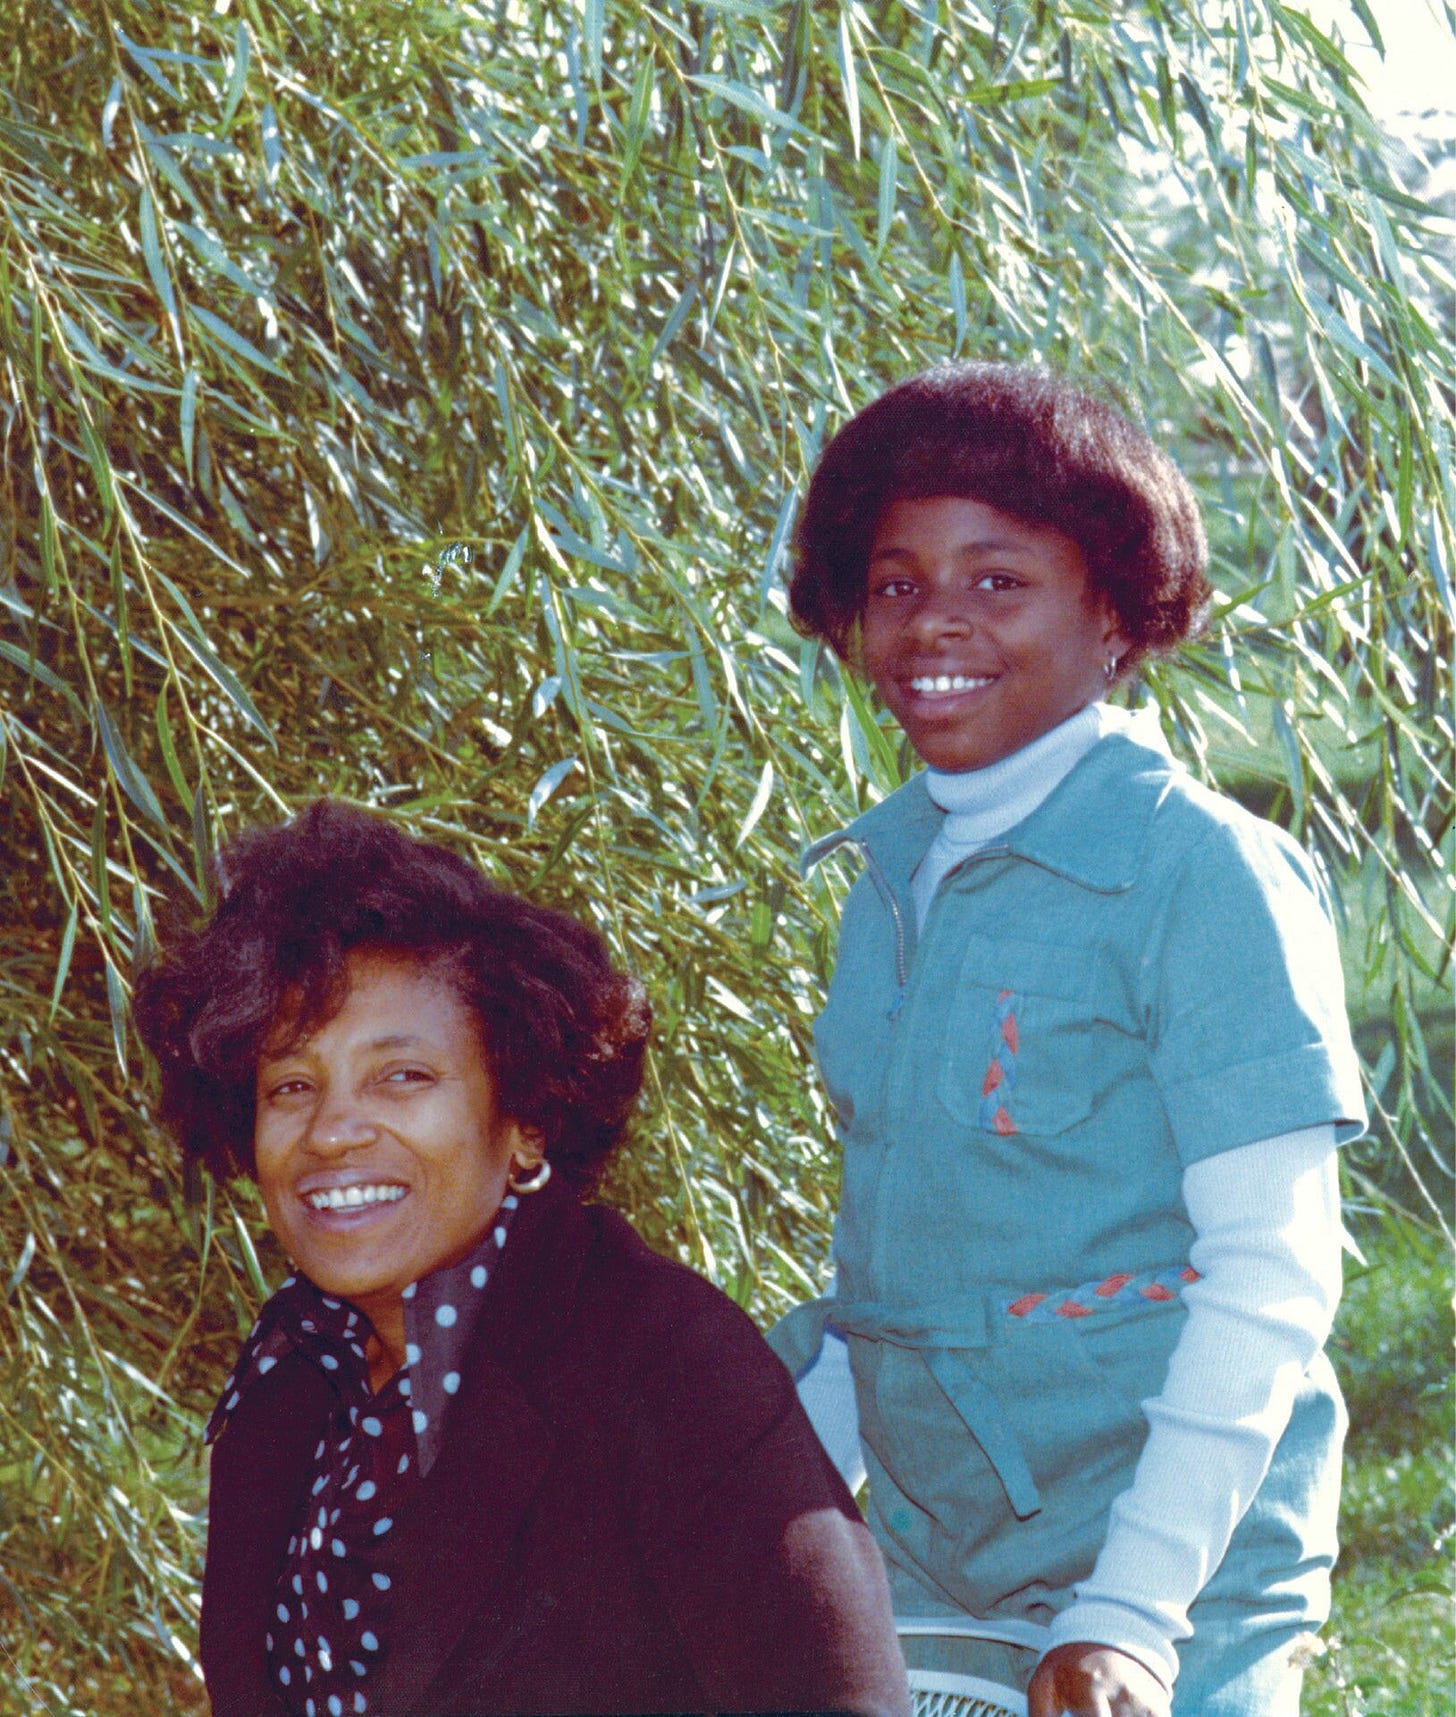 a woman kneeling with a girl standing tall next to her. a tree is in the background. both are afro-descended.